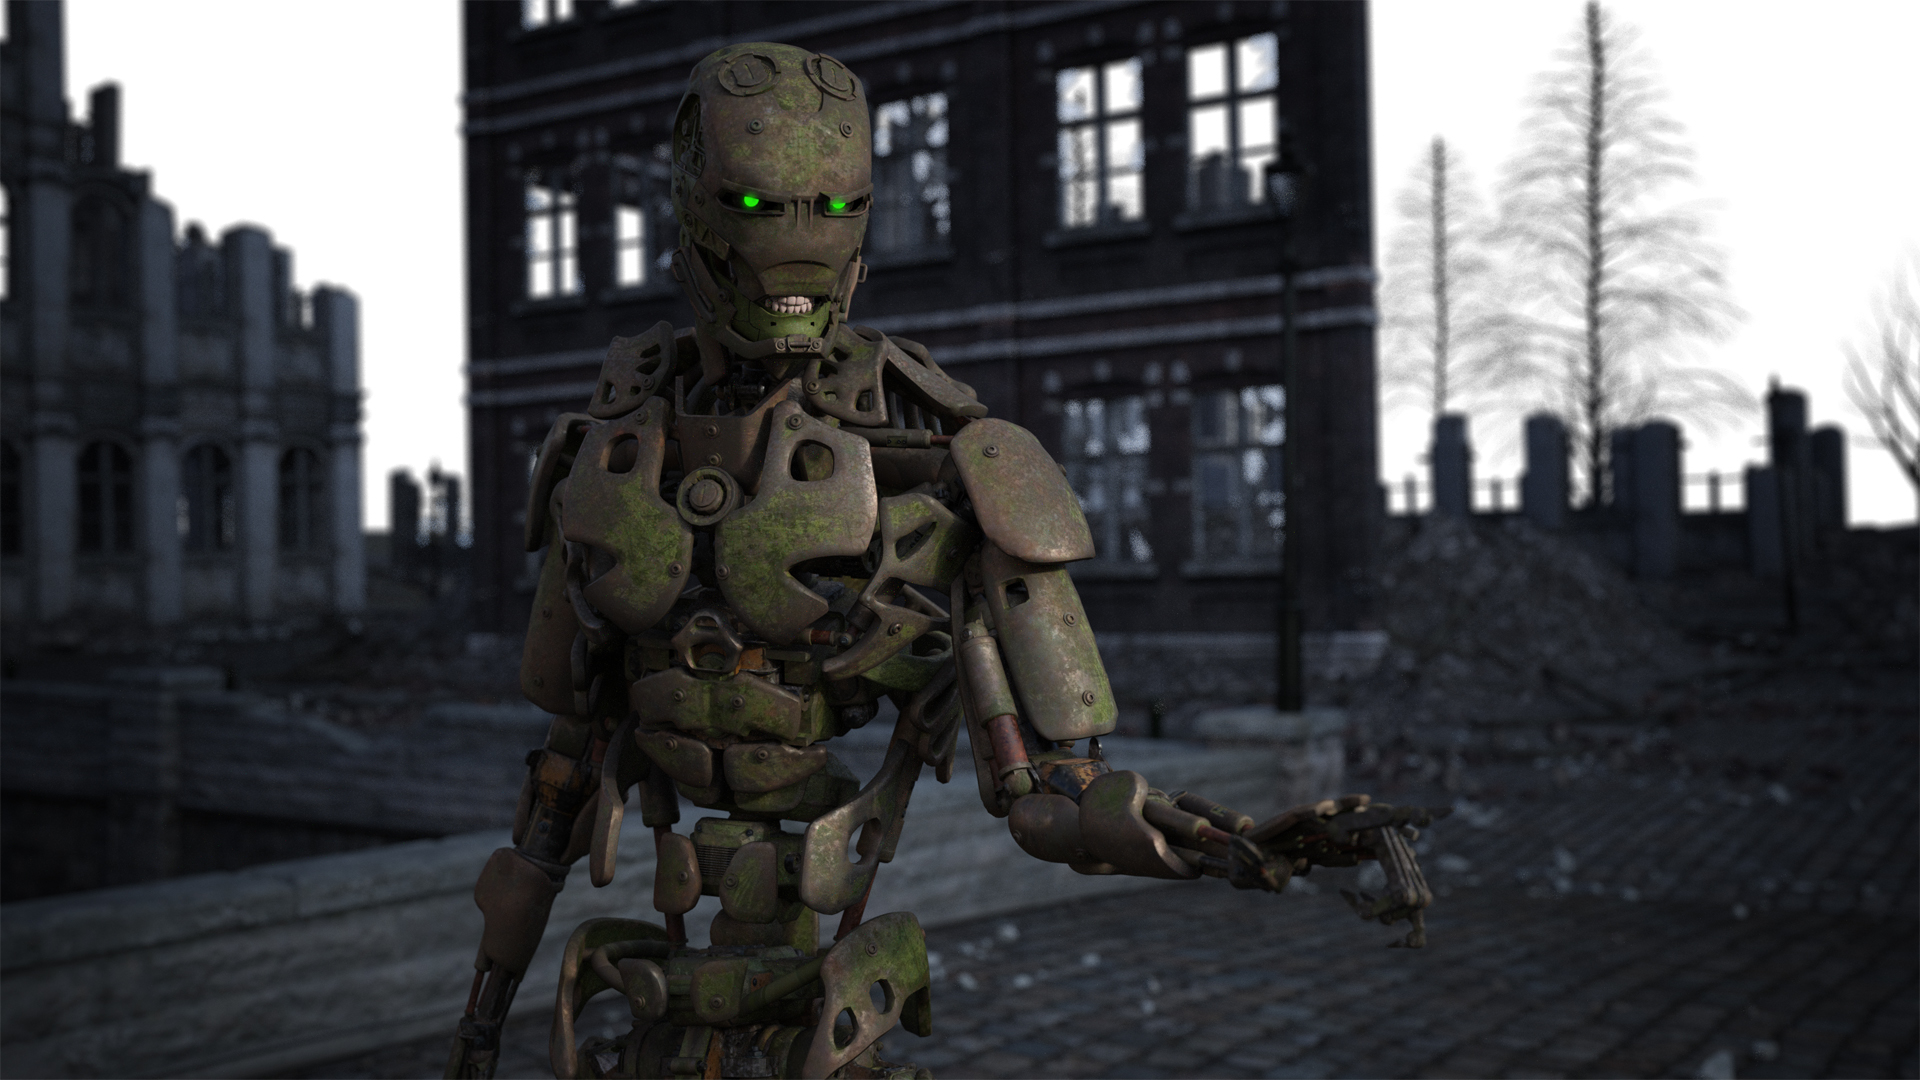 Dystopian Textures for Cyborg Generation 8 by: Moonscape GraphicsSade, 3D Models by Daz 3D